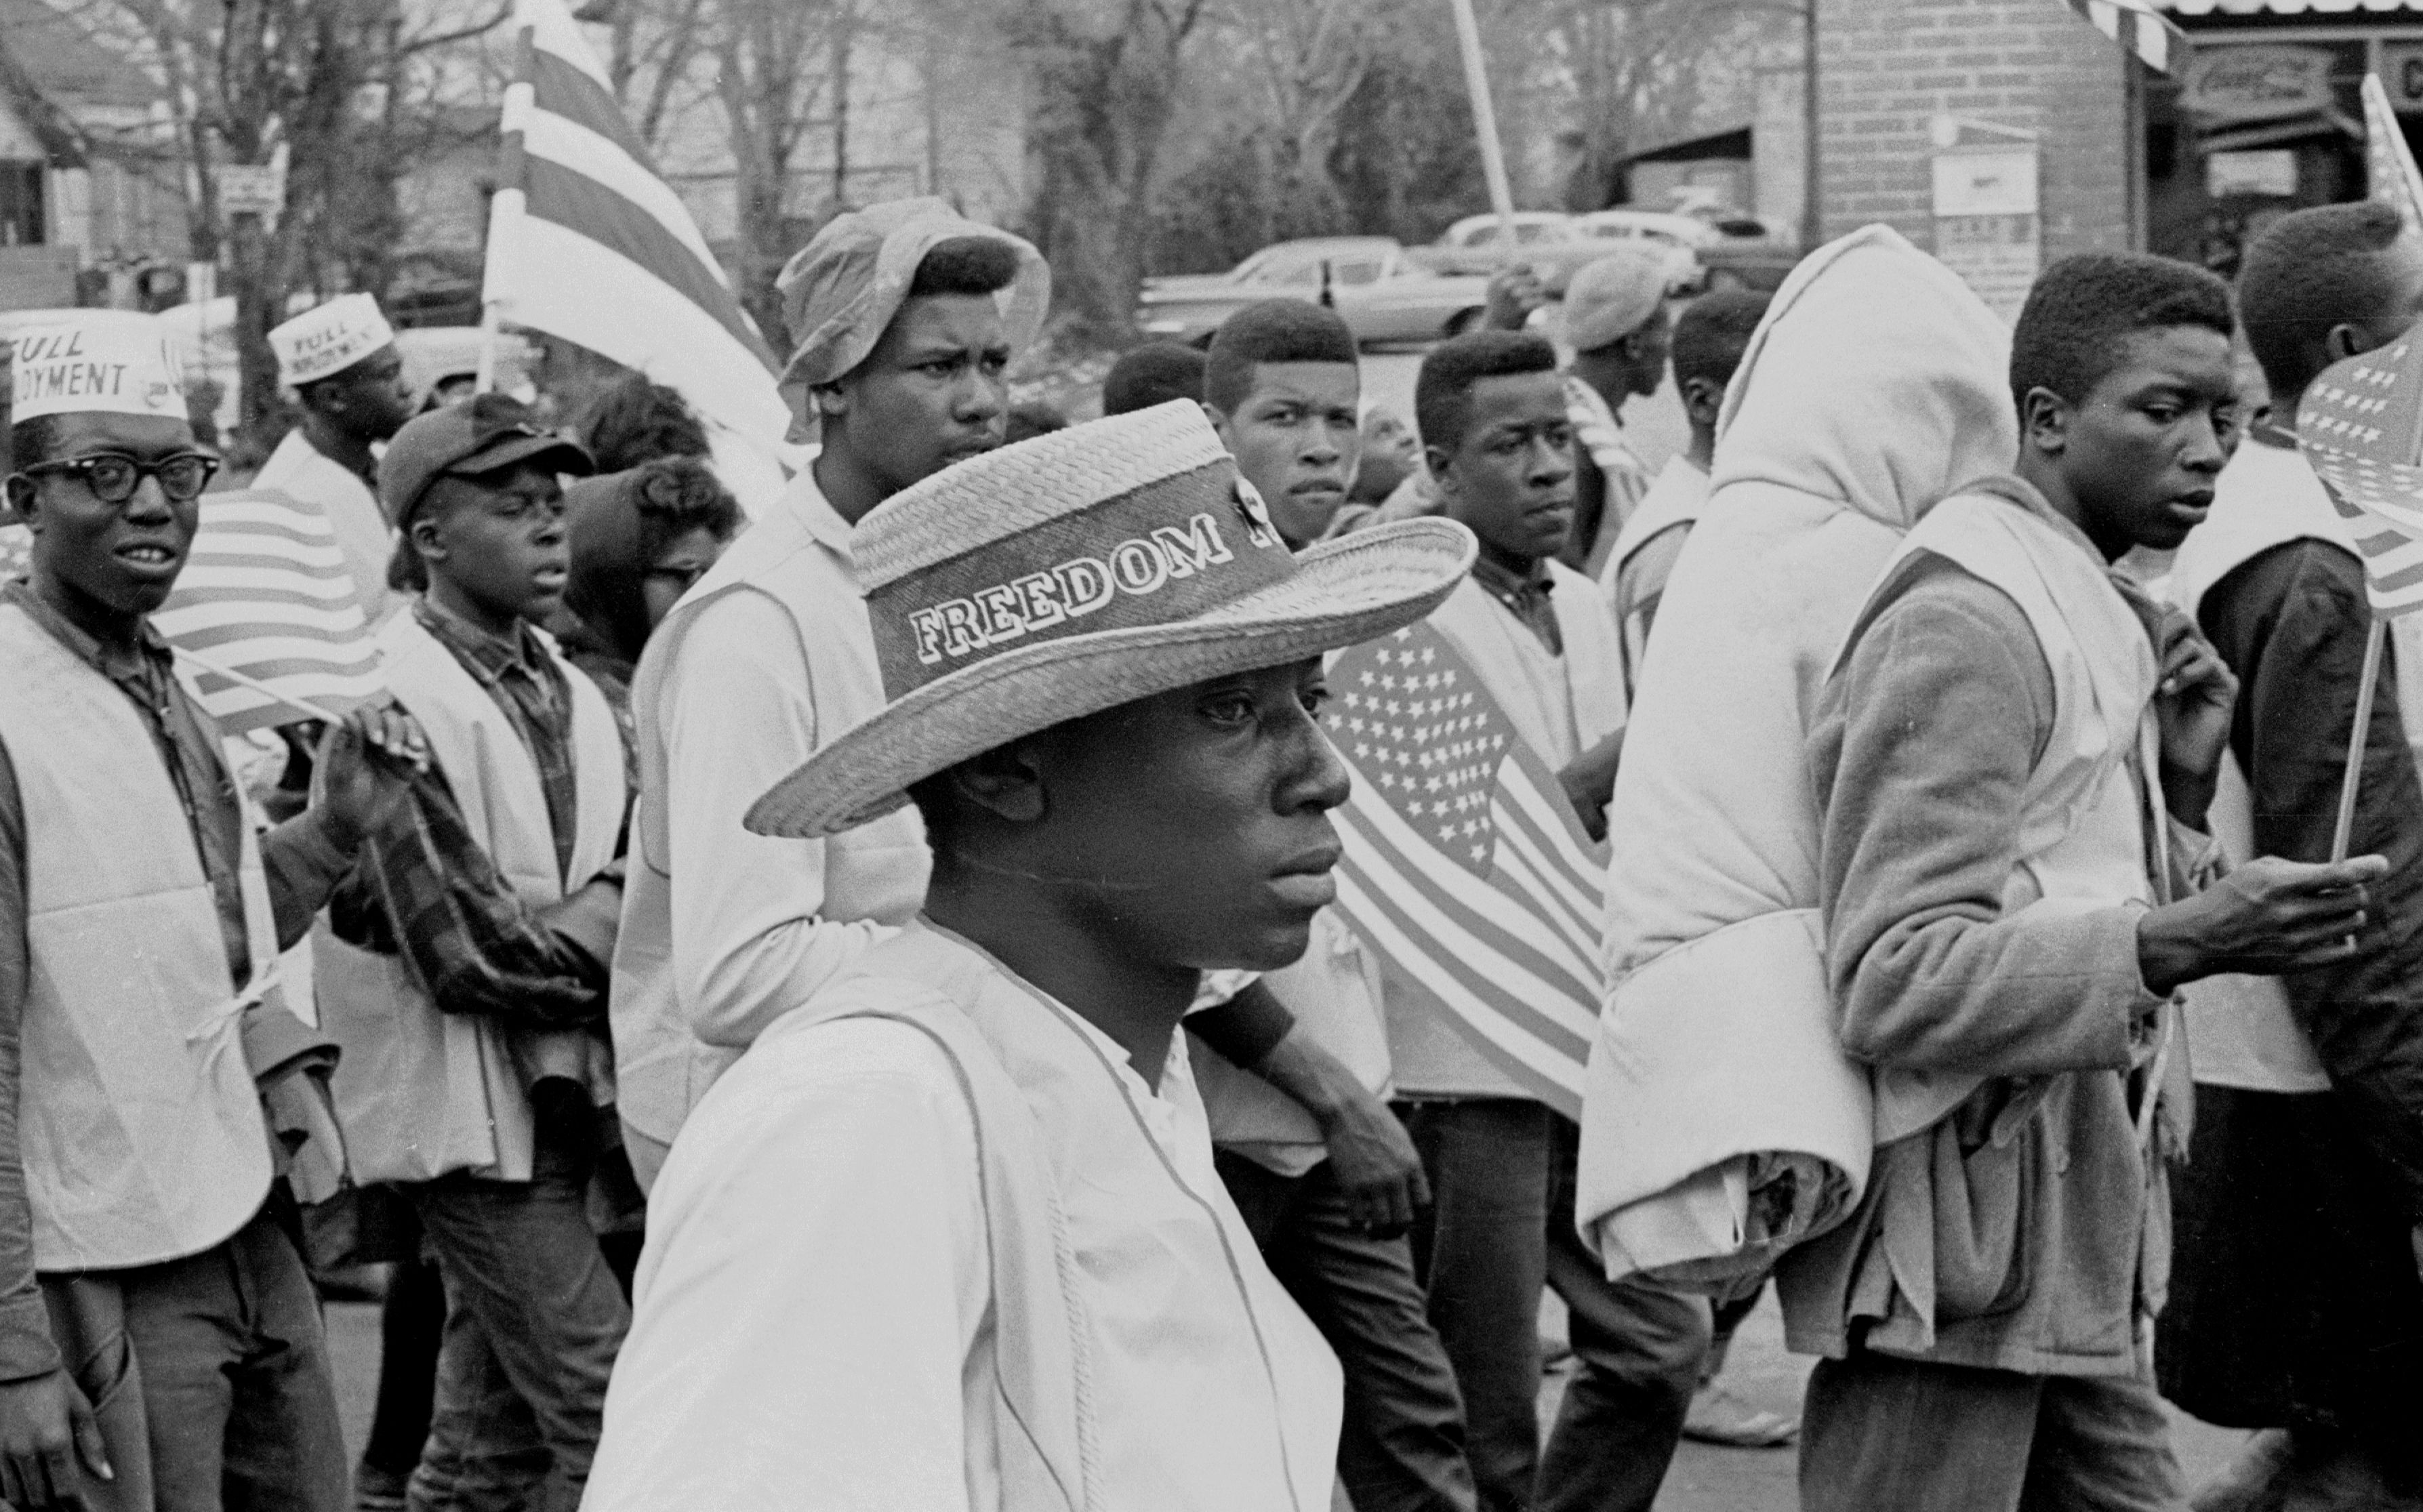 A man with a straw hat that reads 'Freedom' on its band walks with others during on the Selma to Montgomery marches held in support of voter rights, Alabama, late March, 1965